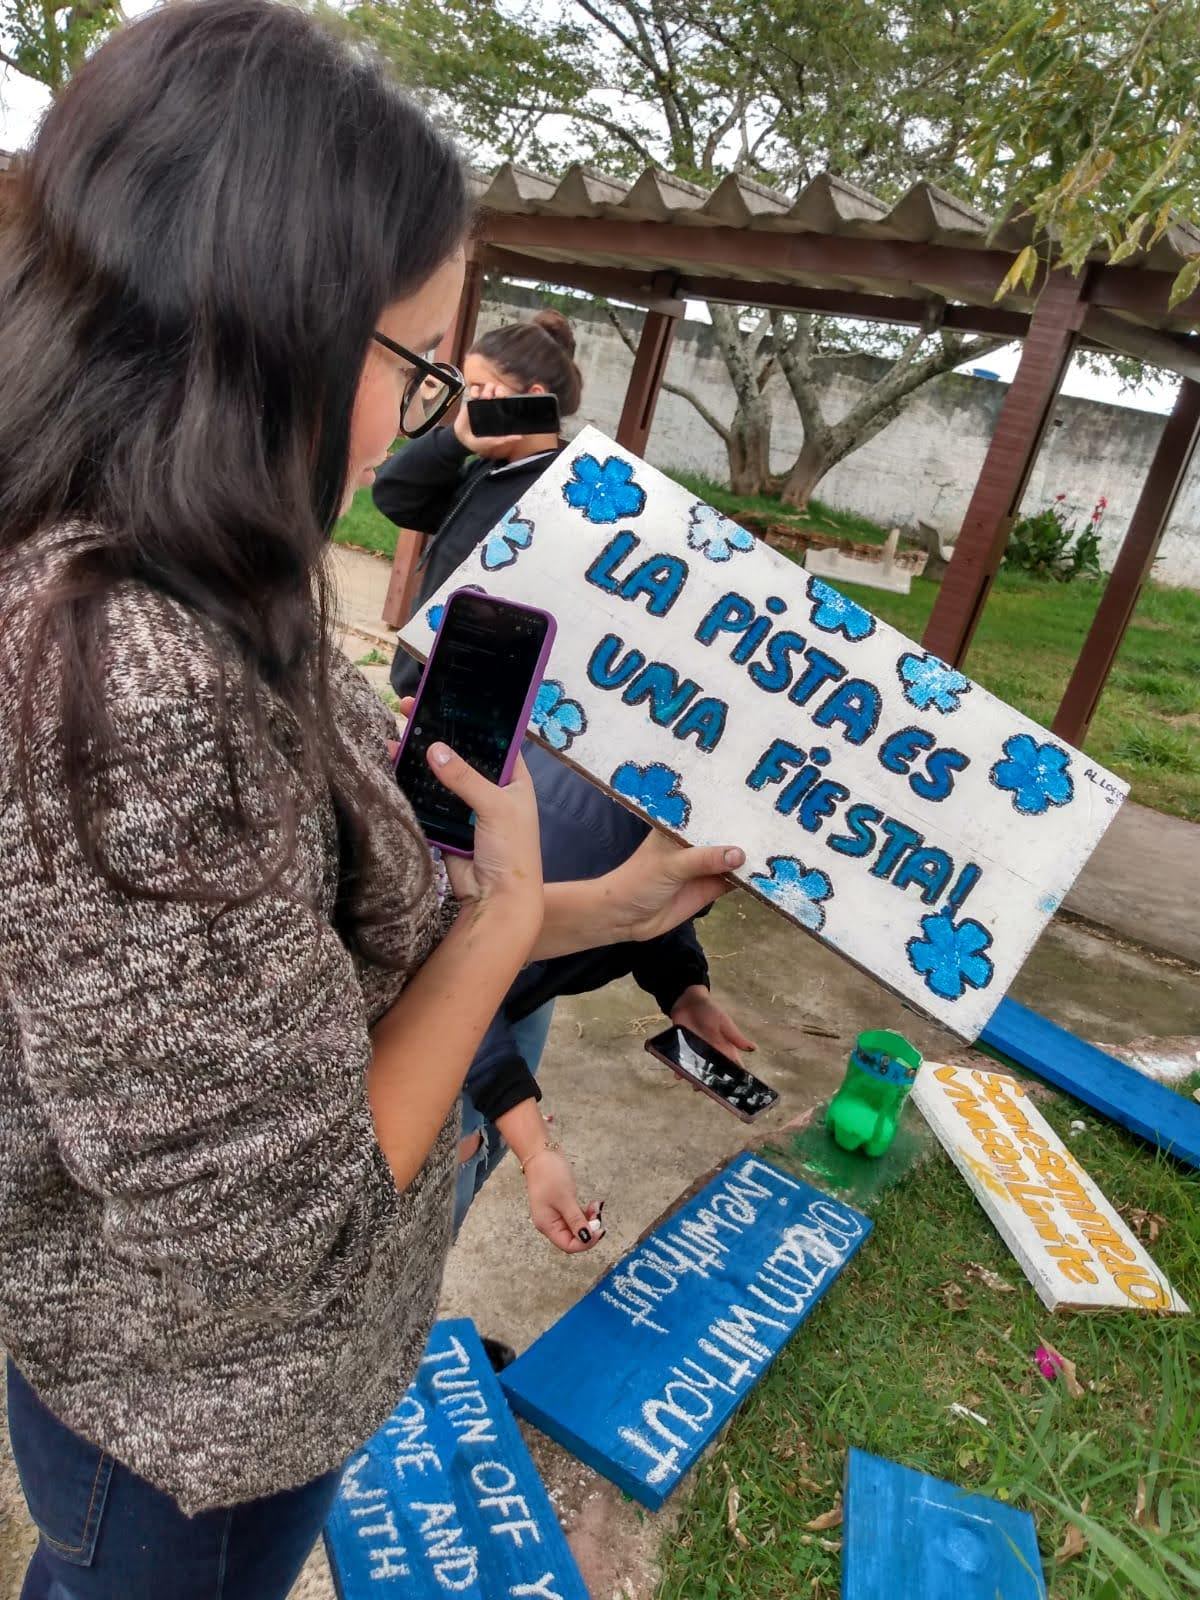 A student takes a picture of a painted sign.